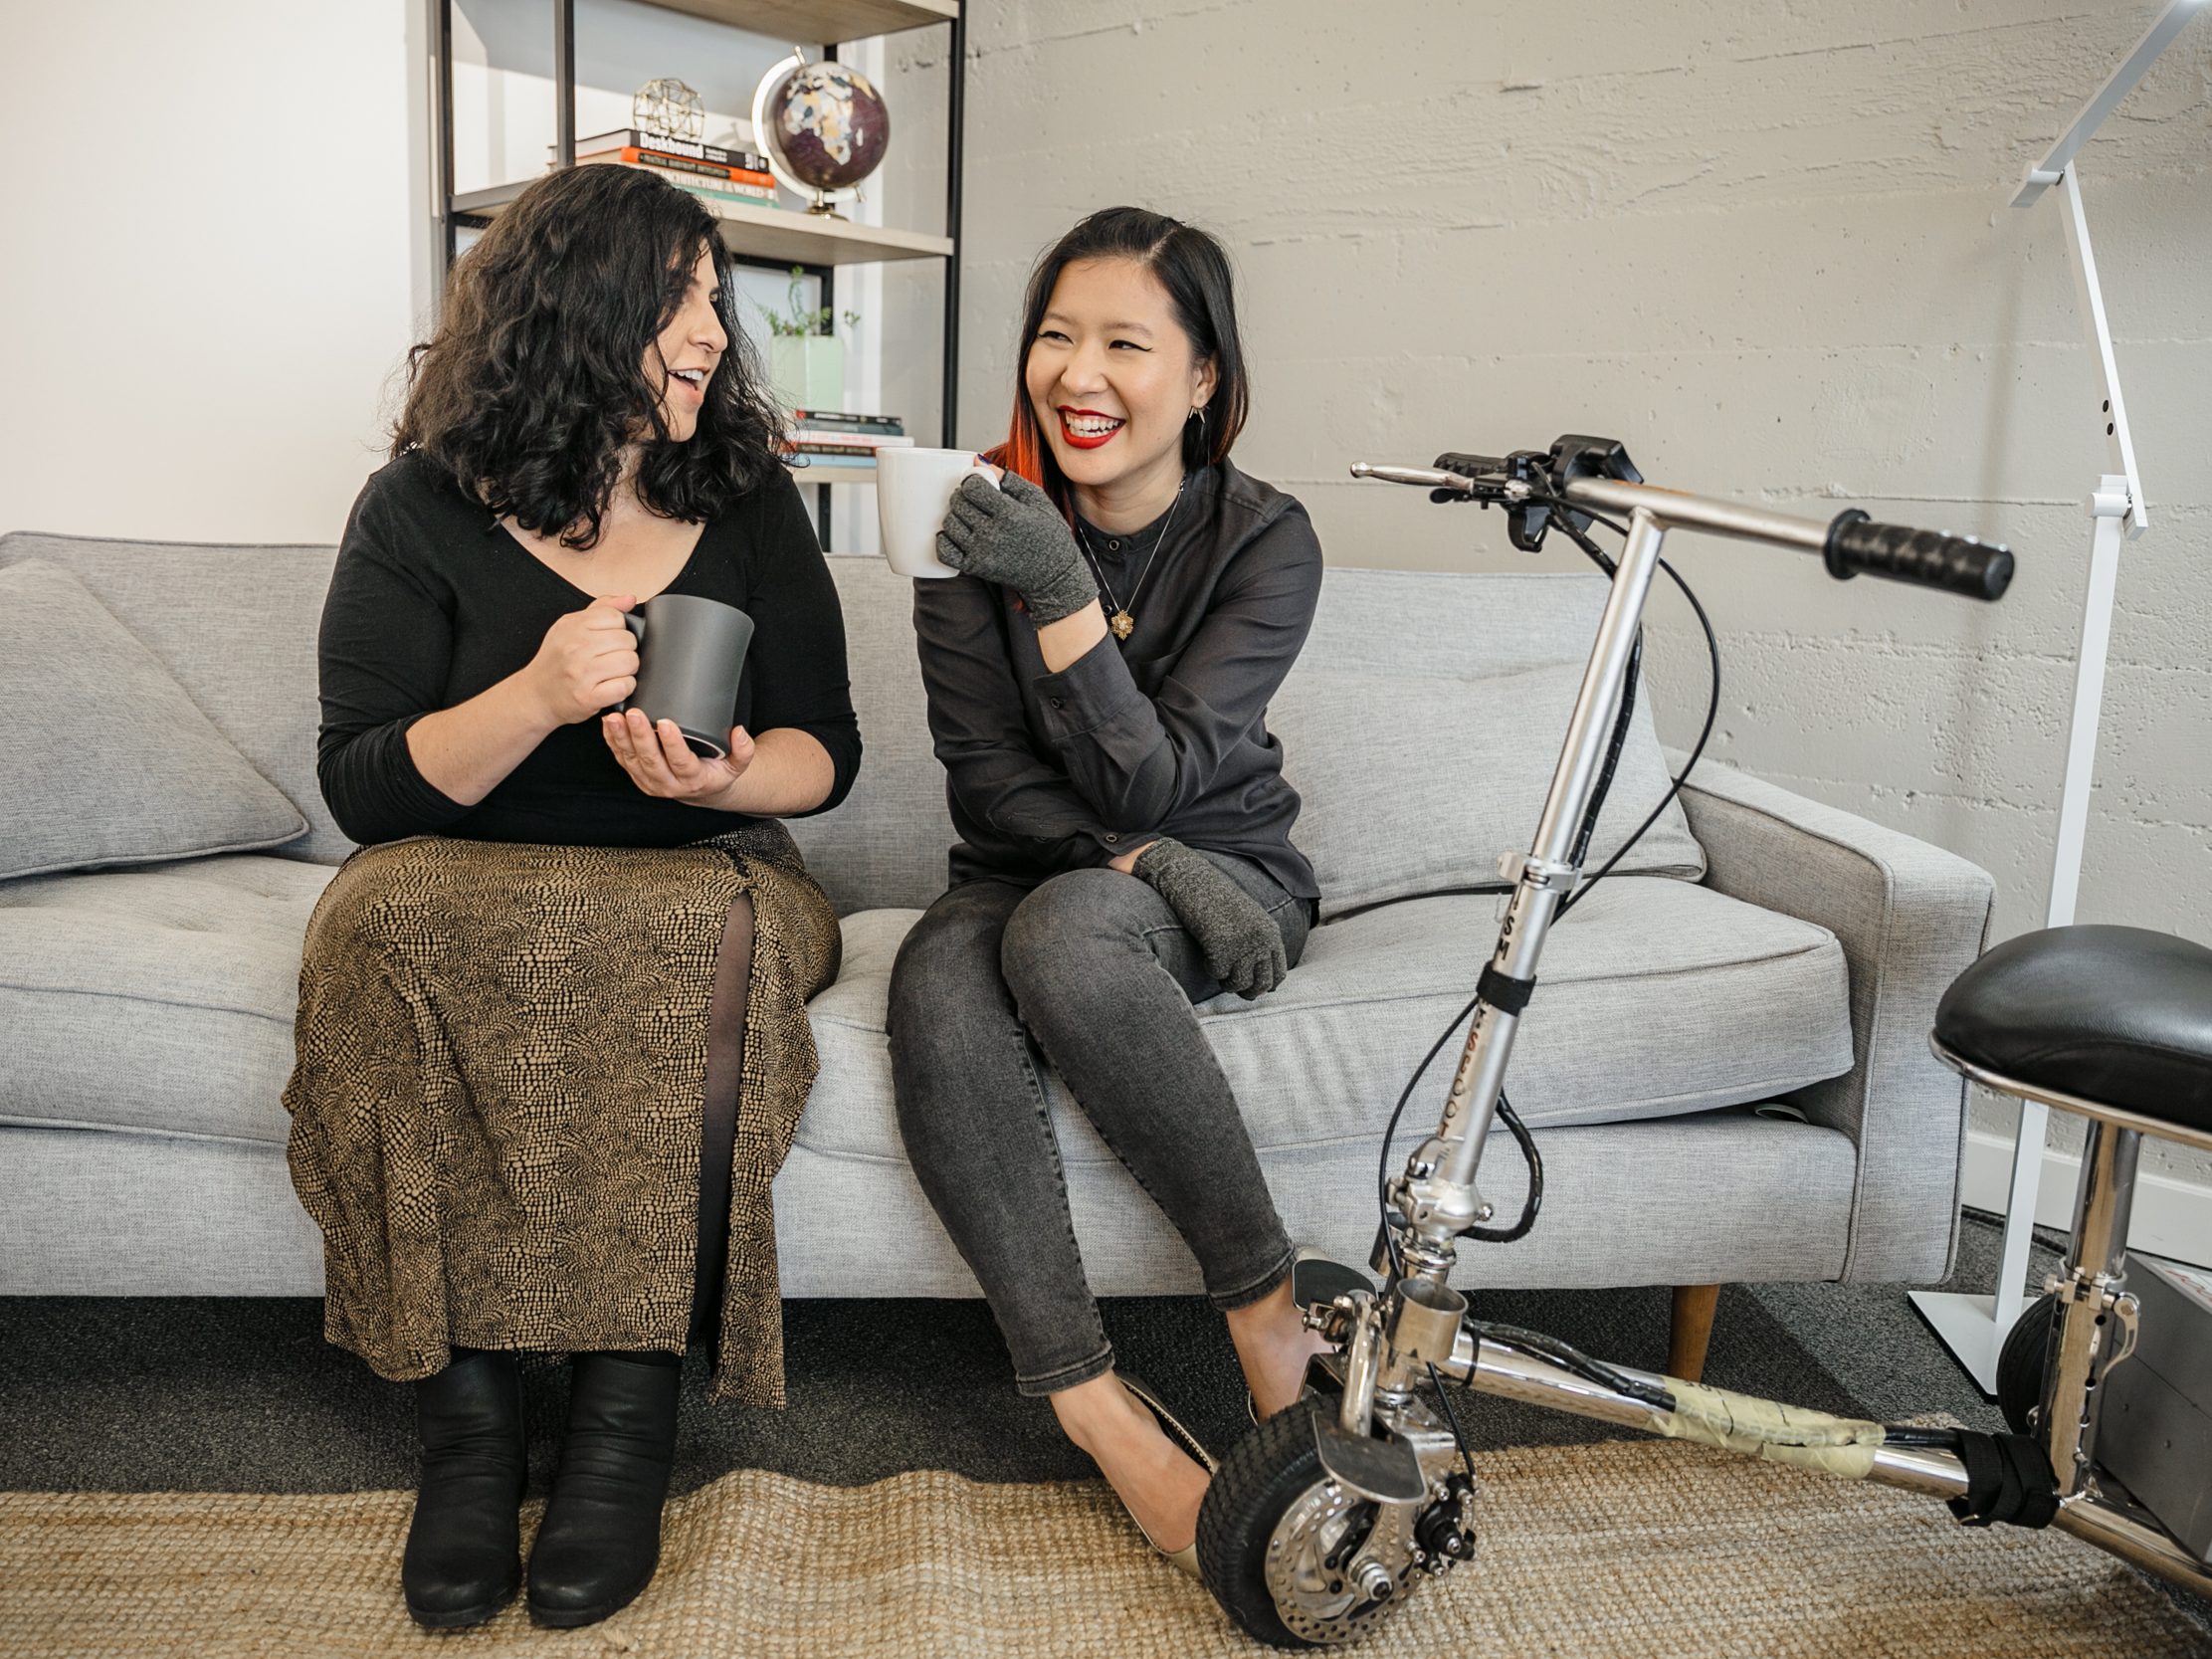 A Latinx disabled woman and an Asian disabled woman chat and sit on a couch, both holding coffee mugs. An electric lightweight mobility scooter rests on the side.